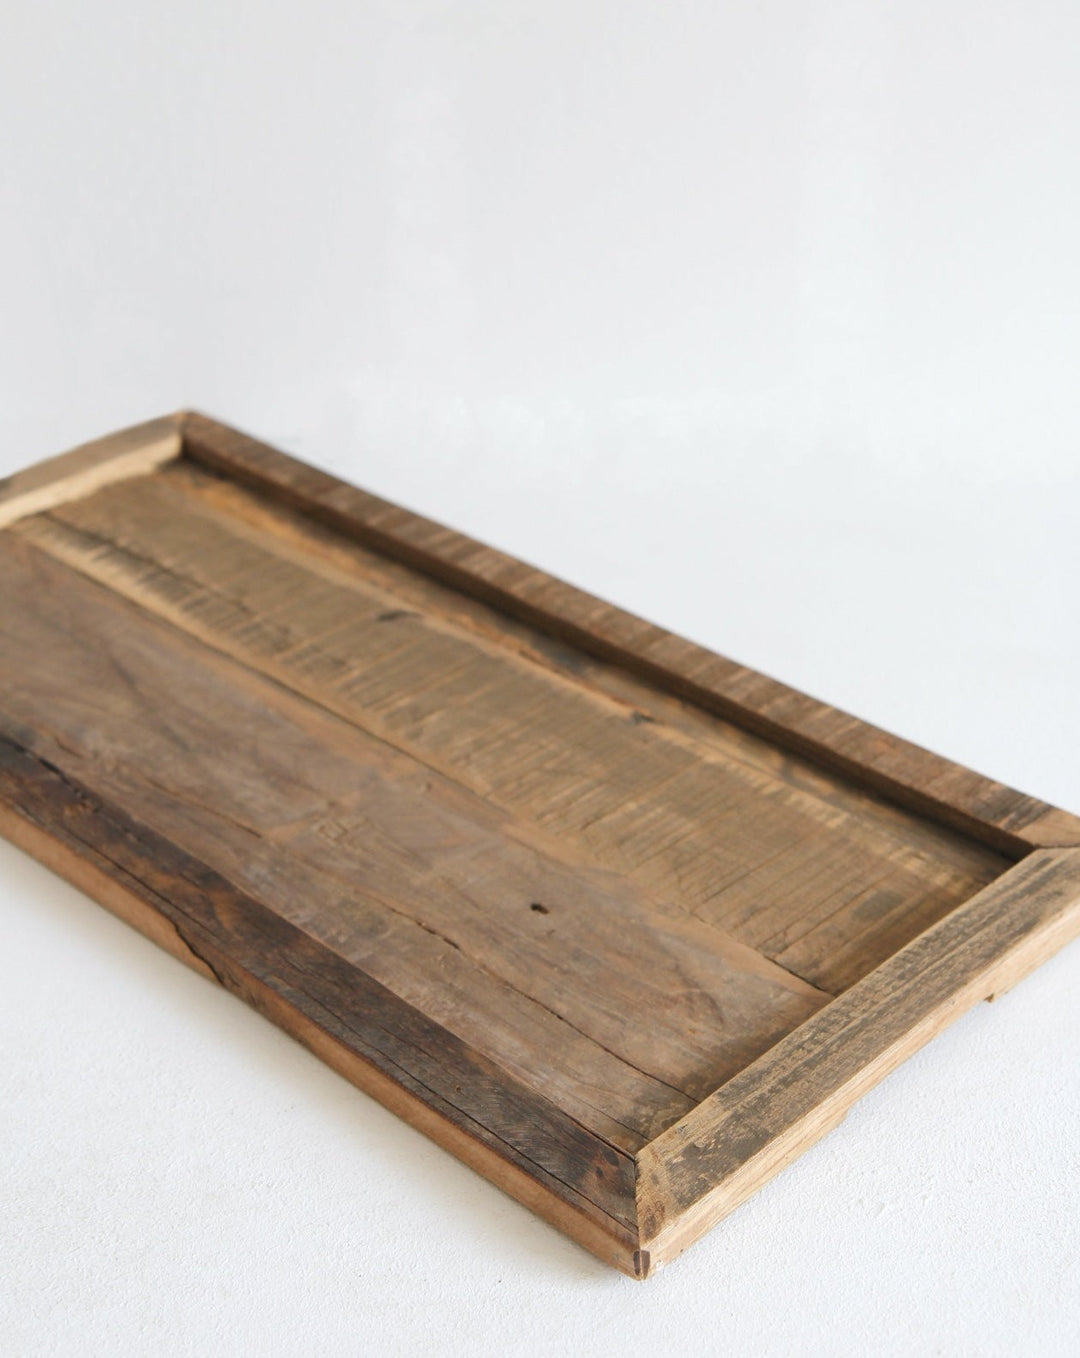 Wooden Oblong Tray / Large